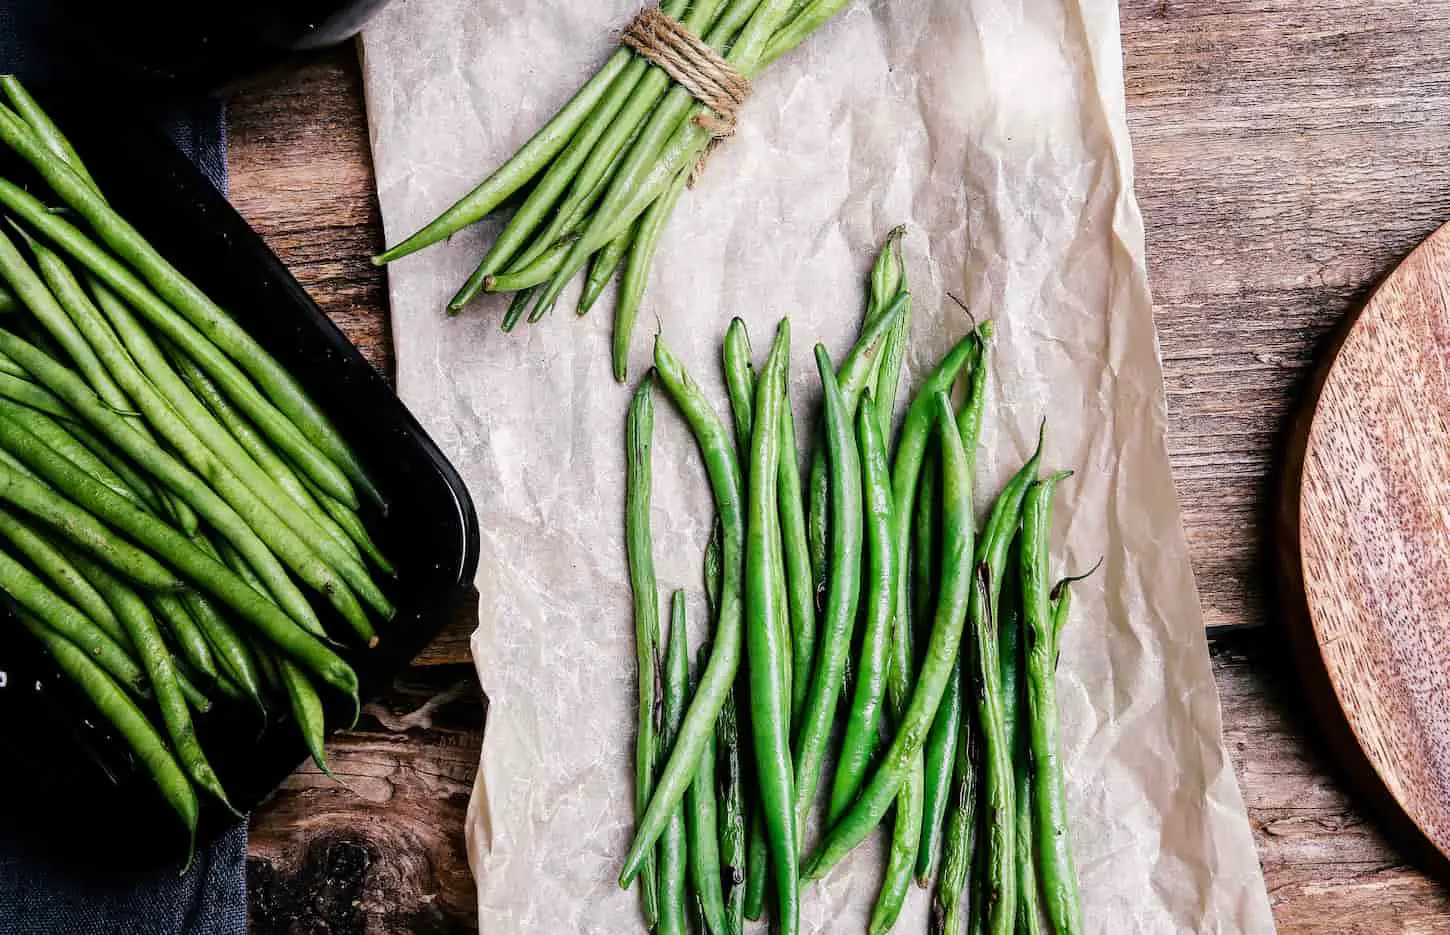 An image of Green beans on the table.